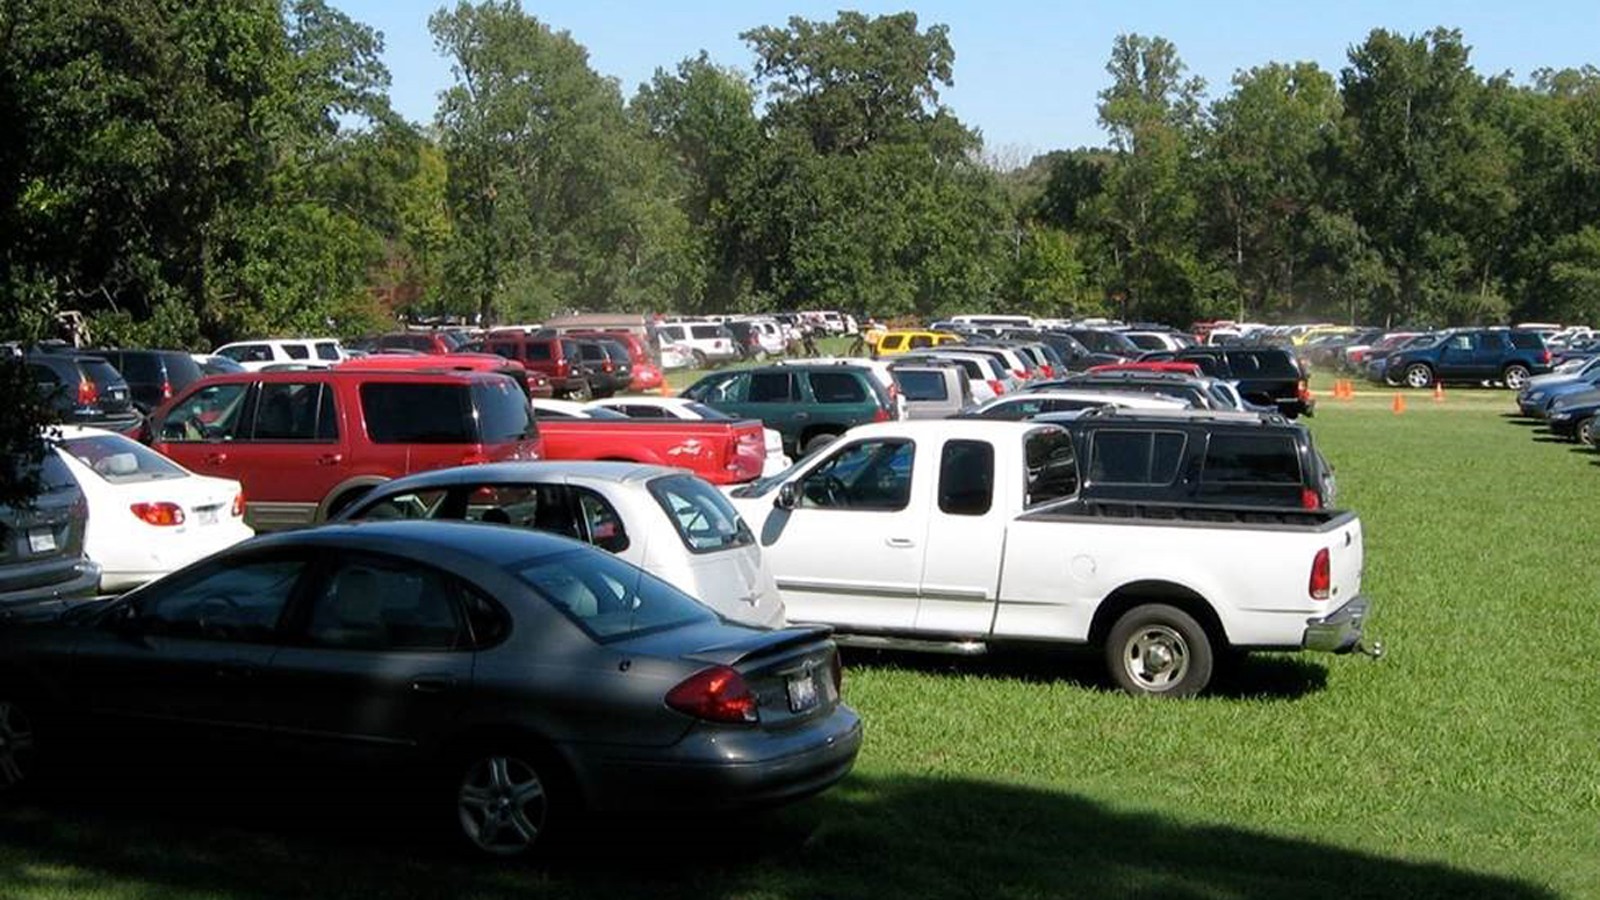 View of parked cars on the greensward - Photo by Lissa Thompson, 2016